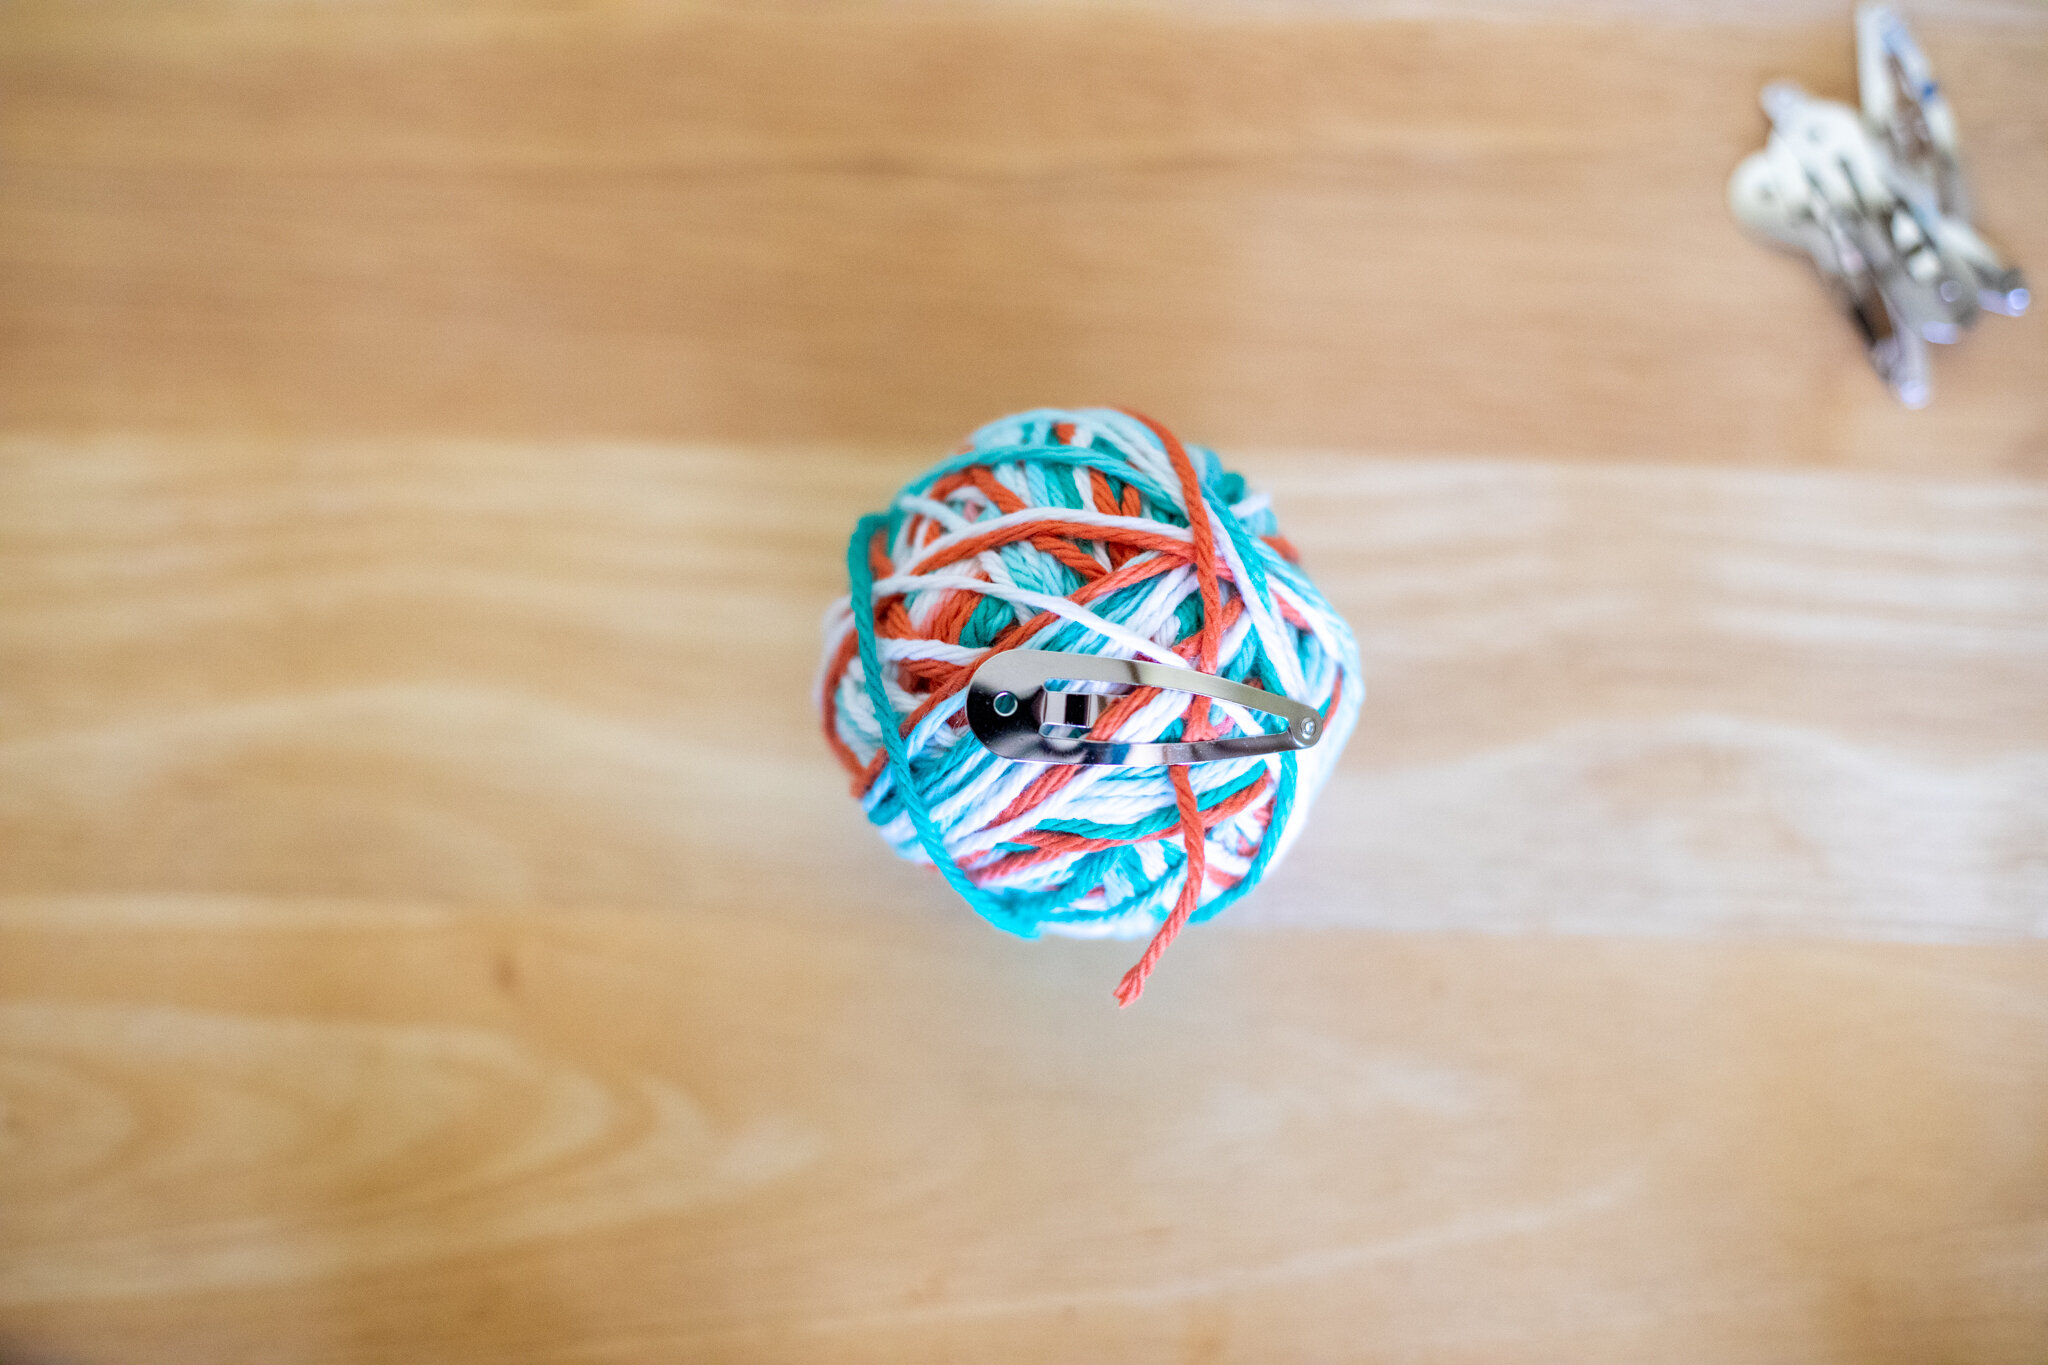  Continue until your ball is a perfect size. You can snip the thread and secure the loose tail with a bit of tape or a springy hairclip. Now you’re ready to start another yarn ball! 